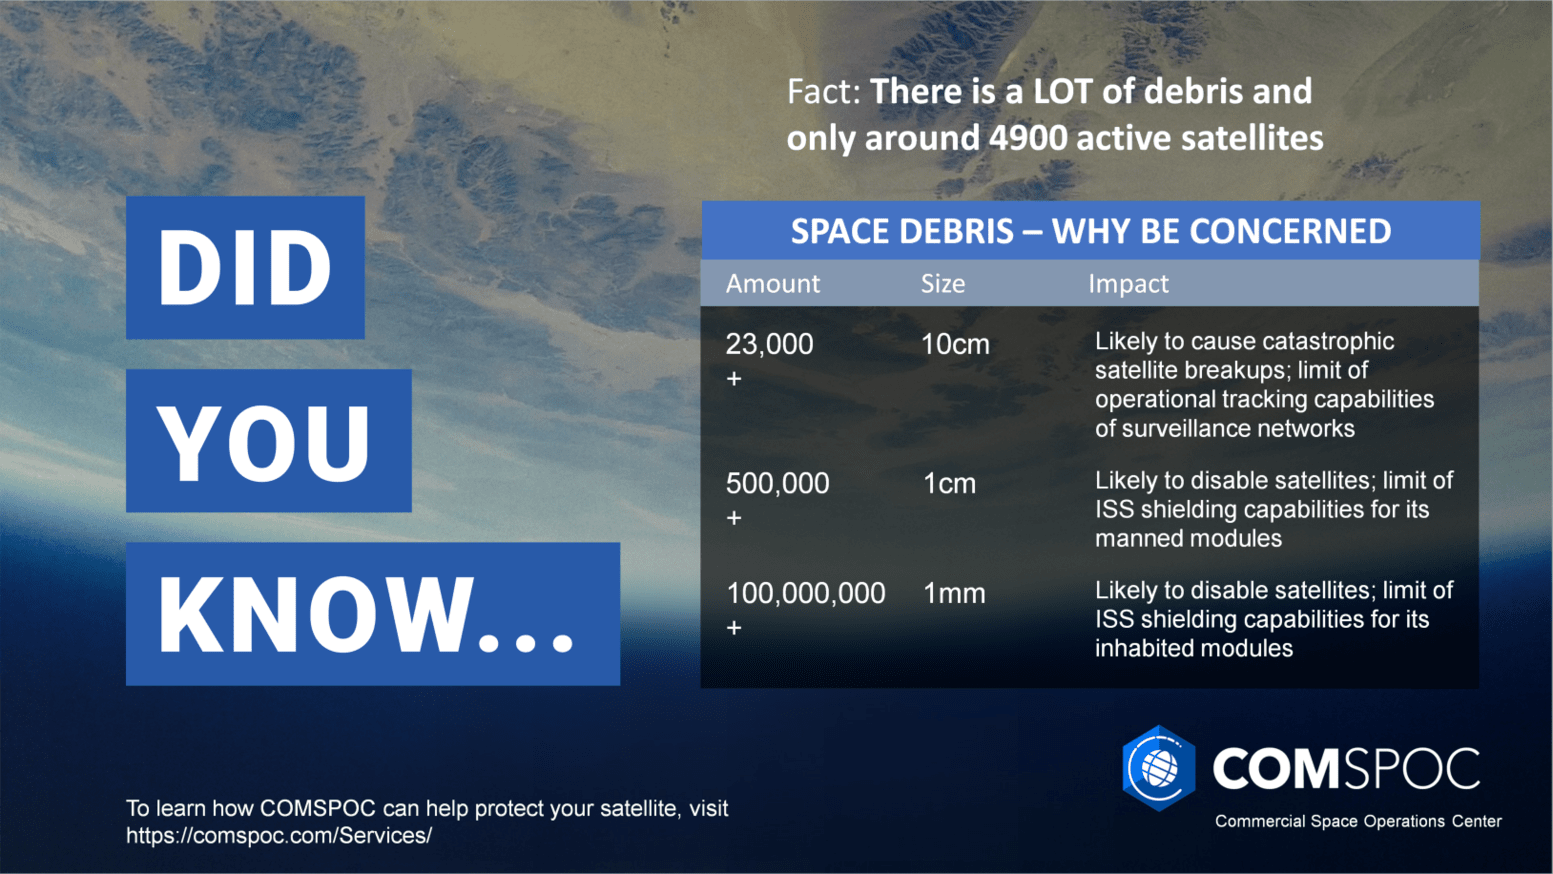 Did You Know: There is a LOT of debris and only around 4900 active satellites.